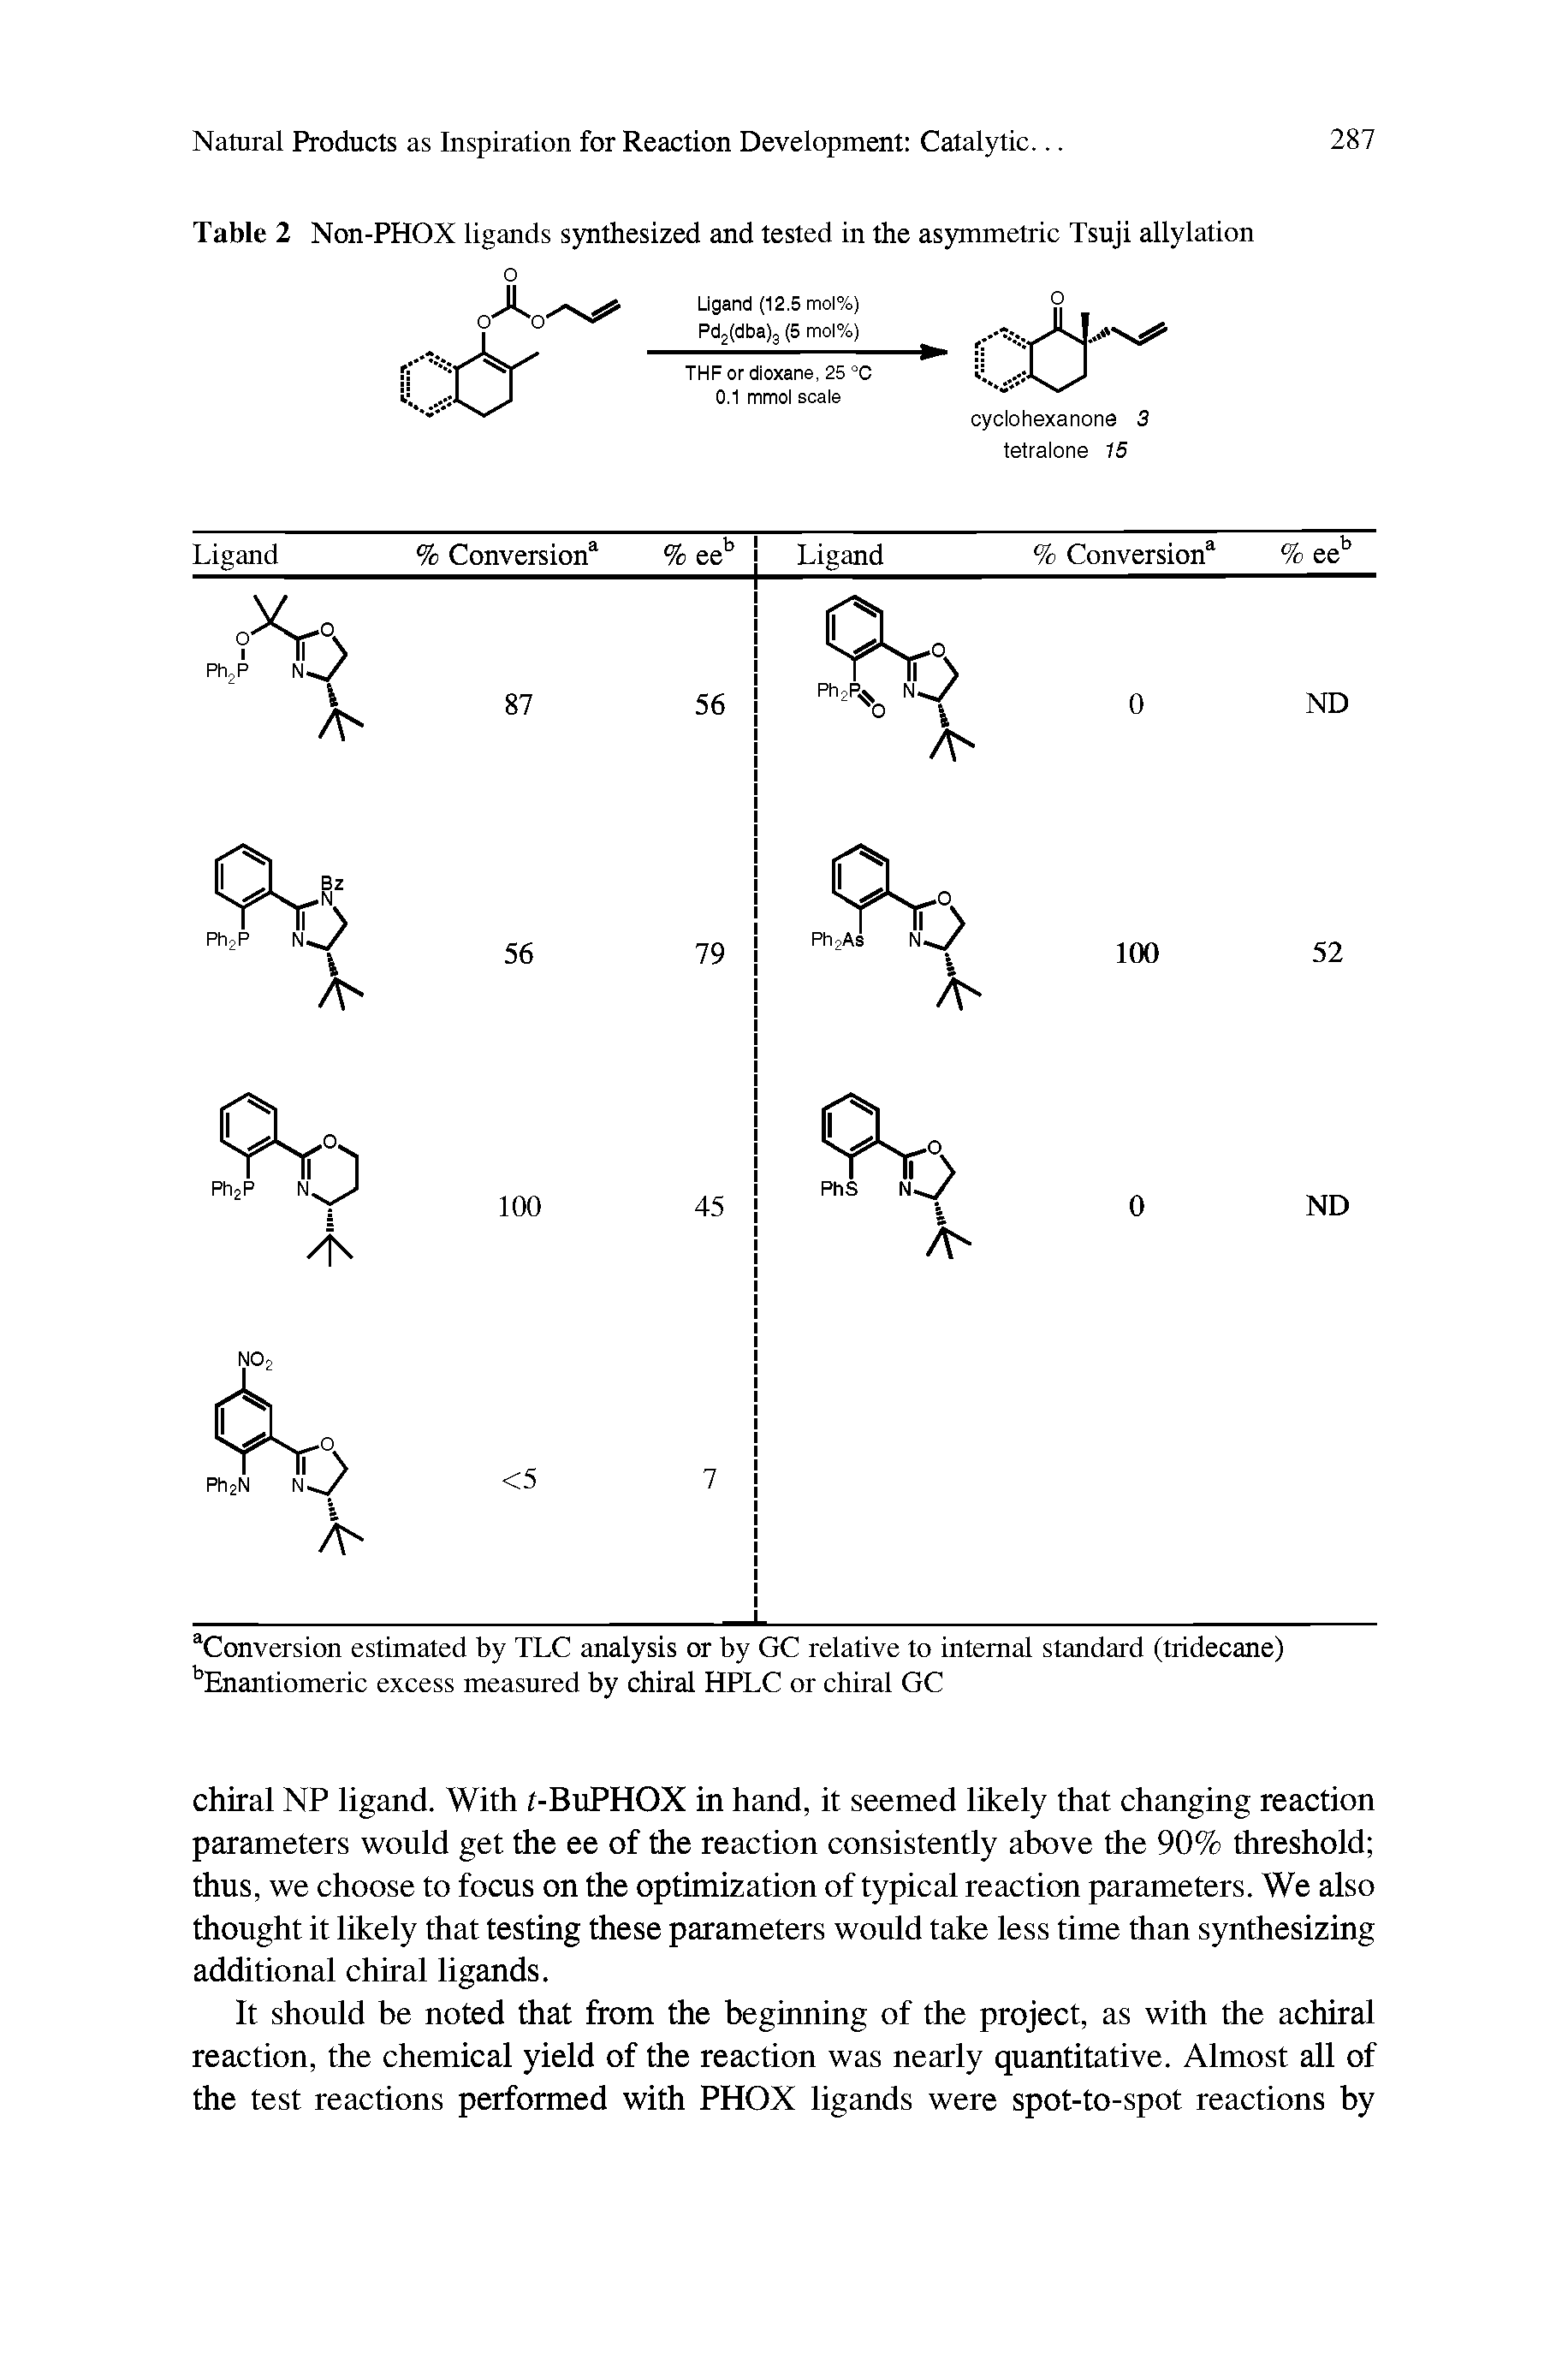 Table 2 Non-PHOX ligands synthesized and tested in the asymmetric Tsuji allylation...